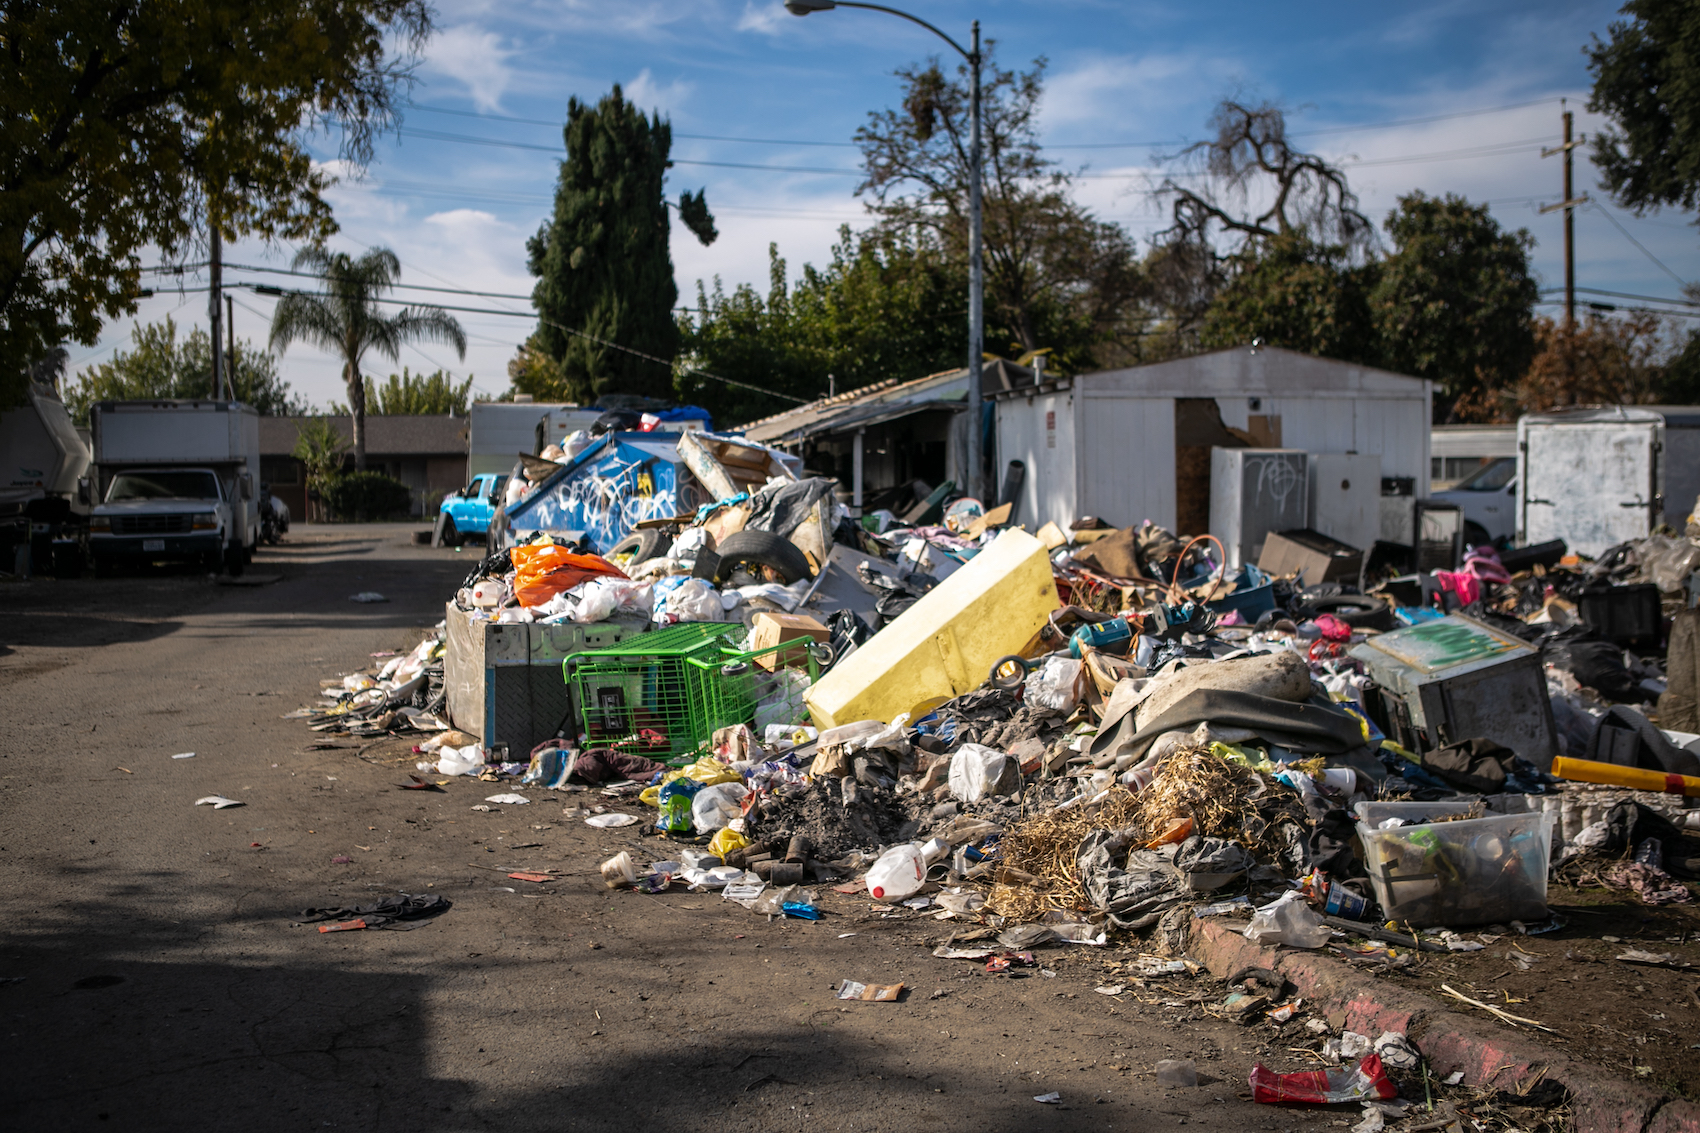 Garbage piles at Stockton Park Village in Stockton on Nov. 22, 2022. Photo by Rahul Lal, CalMatters.